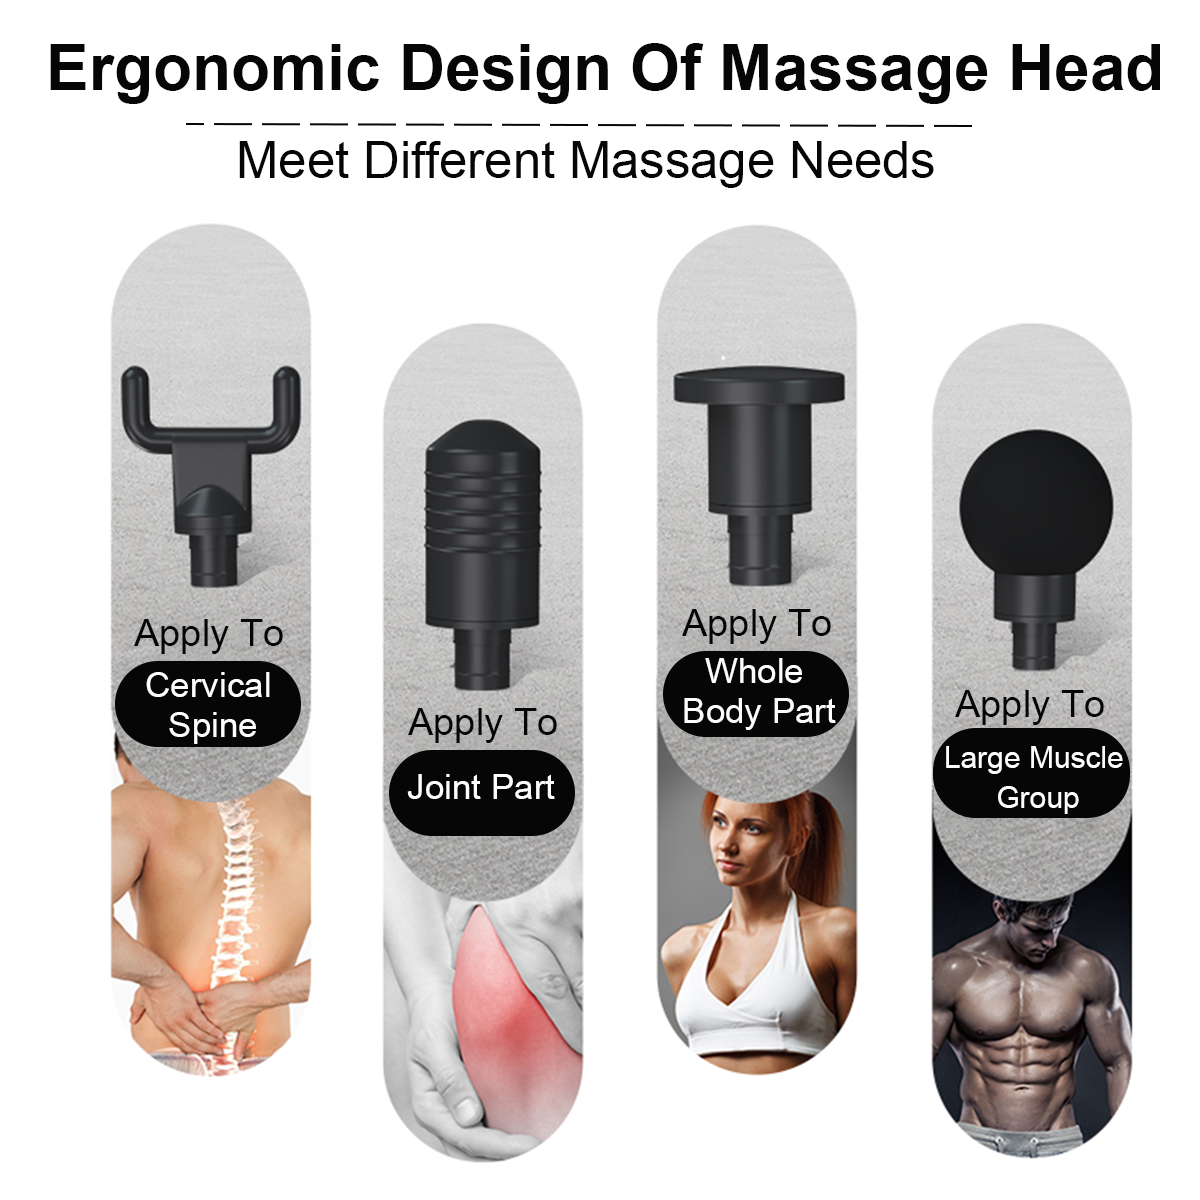 20-Gears-Electric-Percussive-Massager-Handheld-Deep-Muscles-Relaxing-Shock-Vibration-Therapy-Device--1743736-6